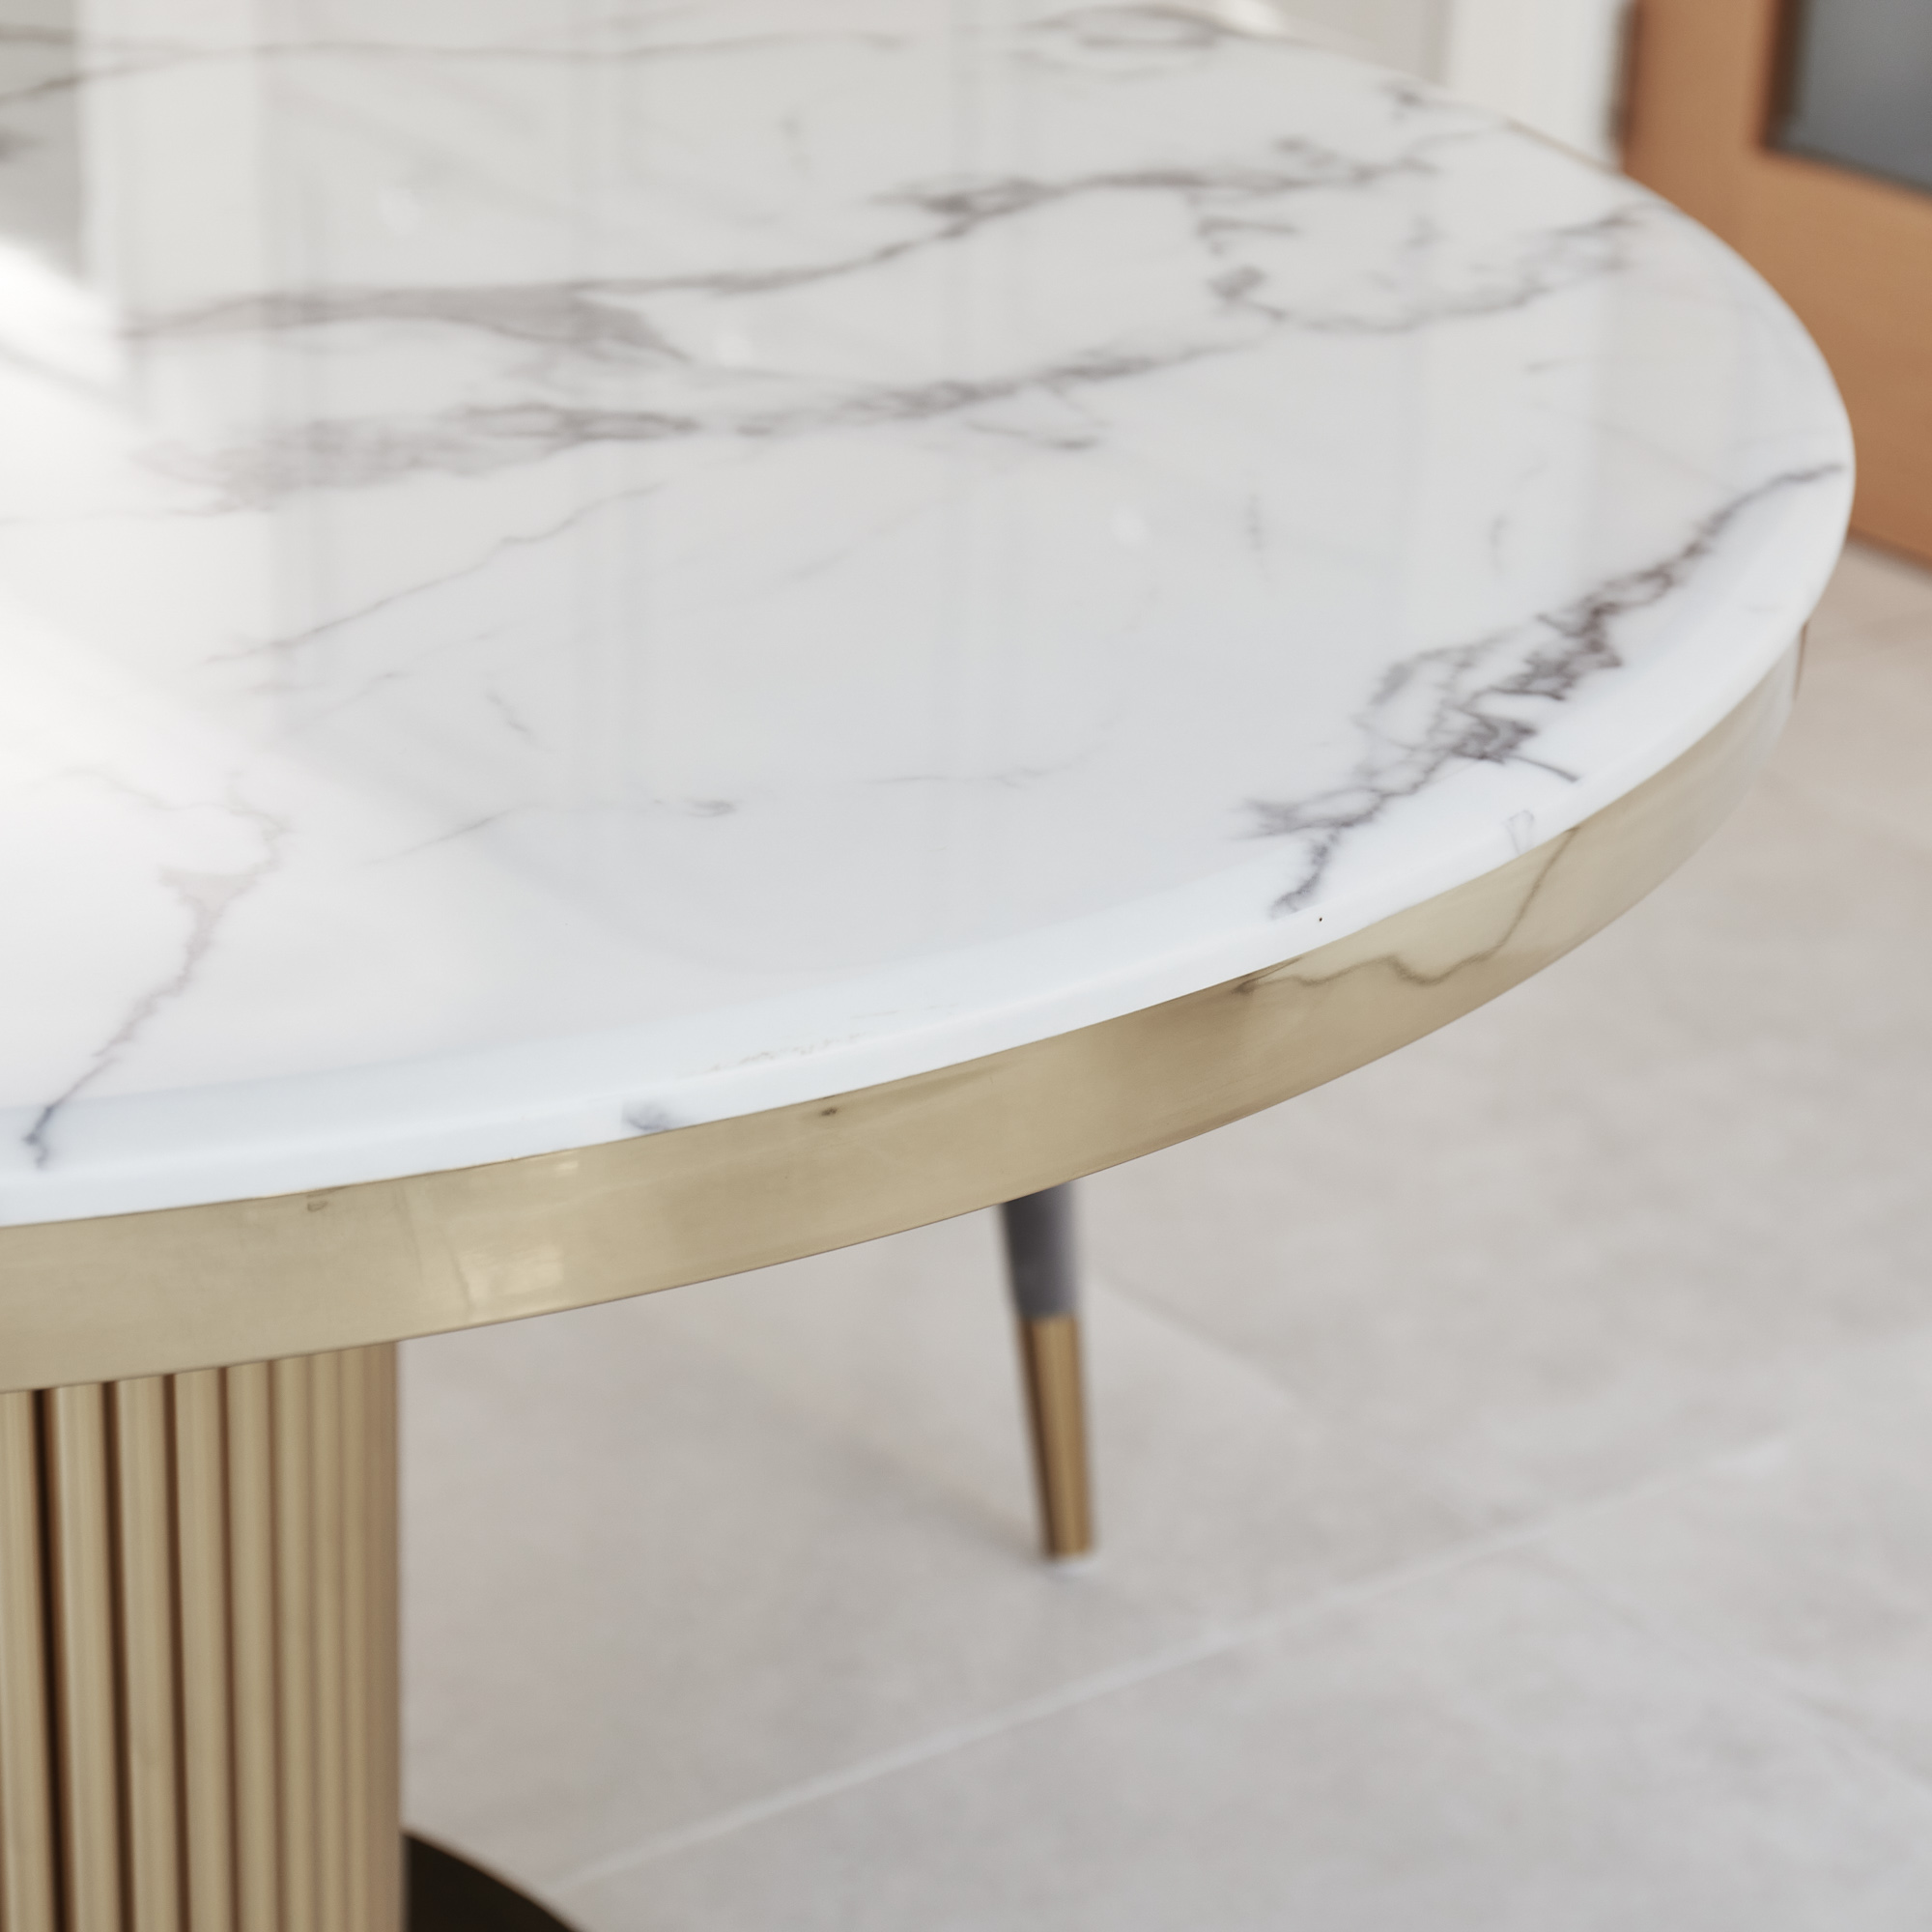 1.5M Circular Pedestal Gold Stainless Steel Dining Table with White Marble Effect